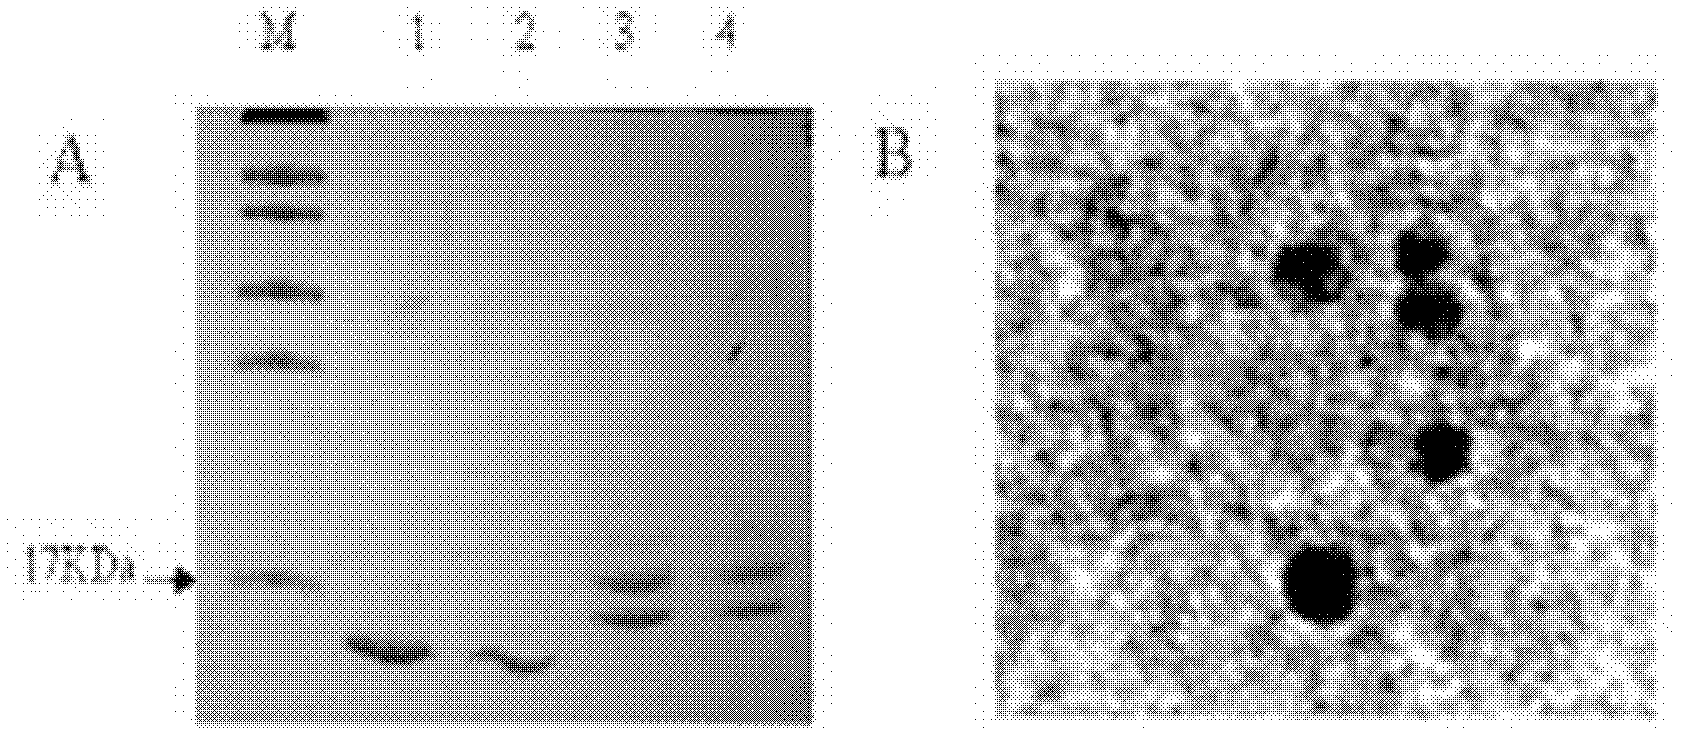 Angiotensin II receptor 1 type polypeptide-vector vaccine and application thereof